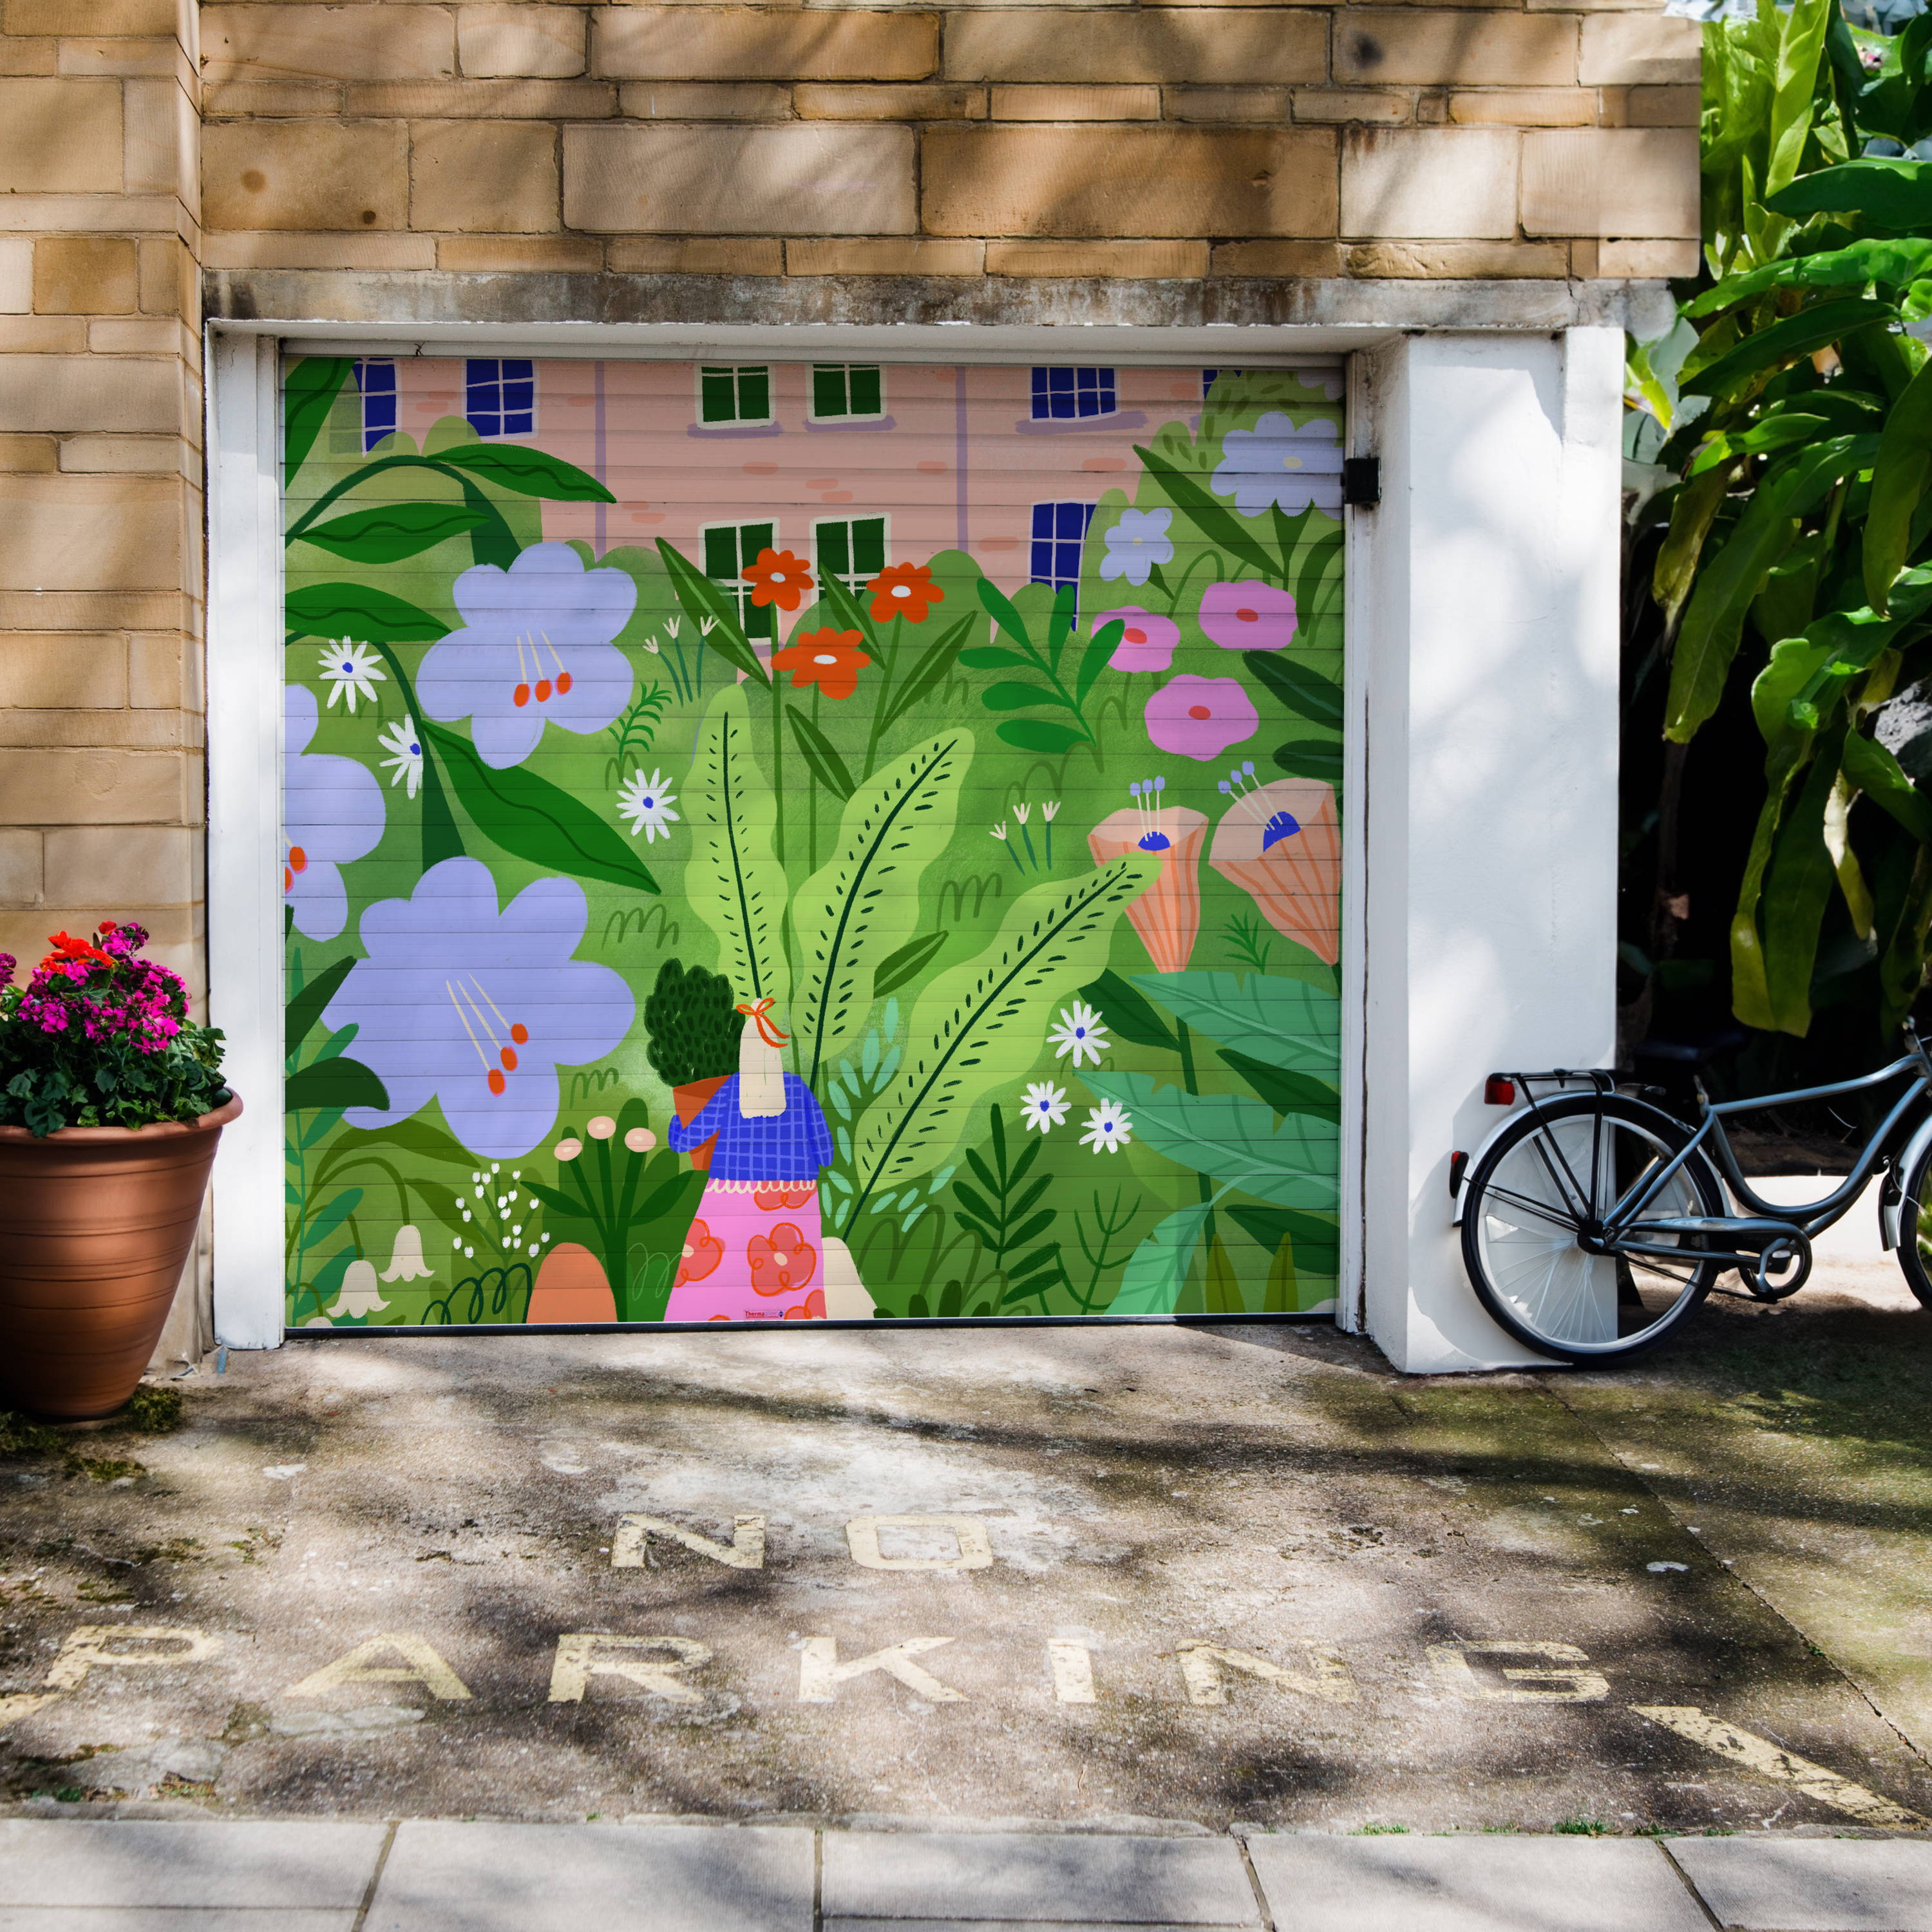 Floral Mural on garage door, with plants and bike